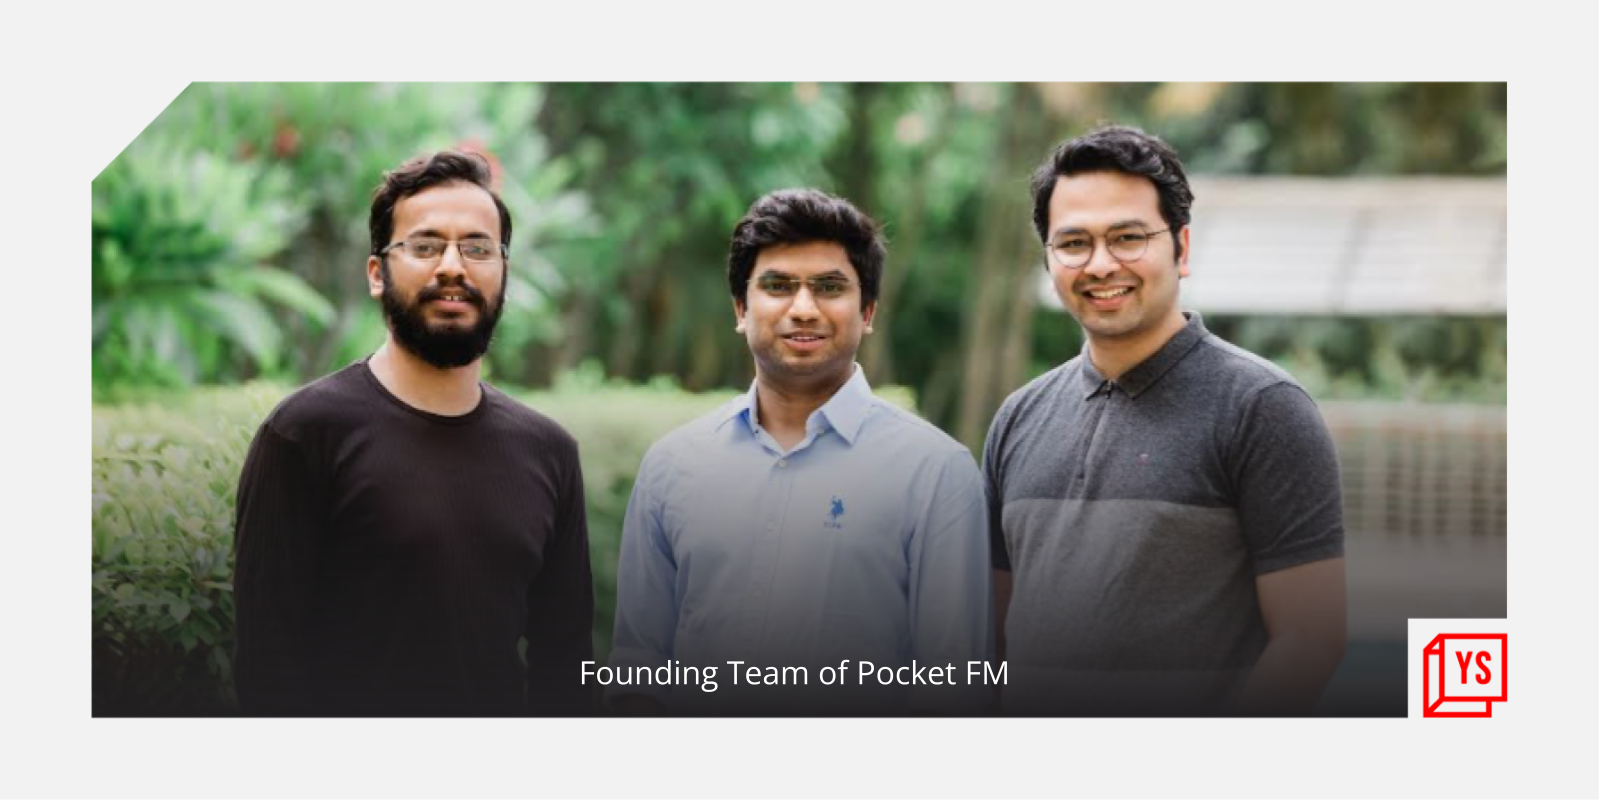 [Funding alert] Pocket FM raises $65M in Series C round from Goodwater Capital, Naver and others